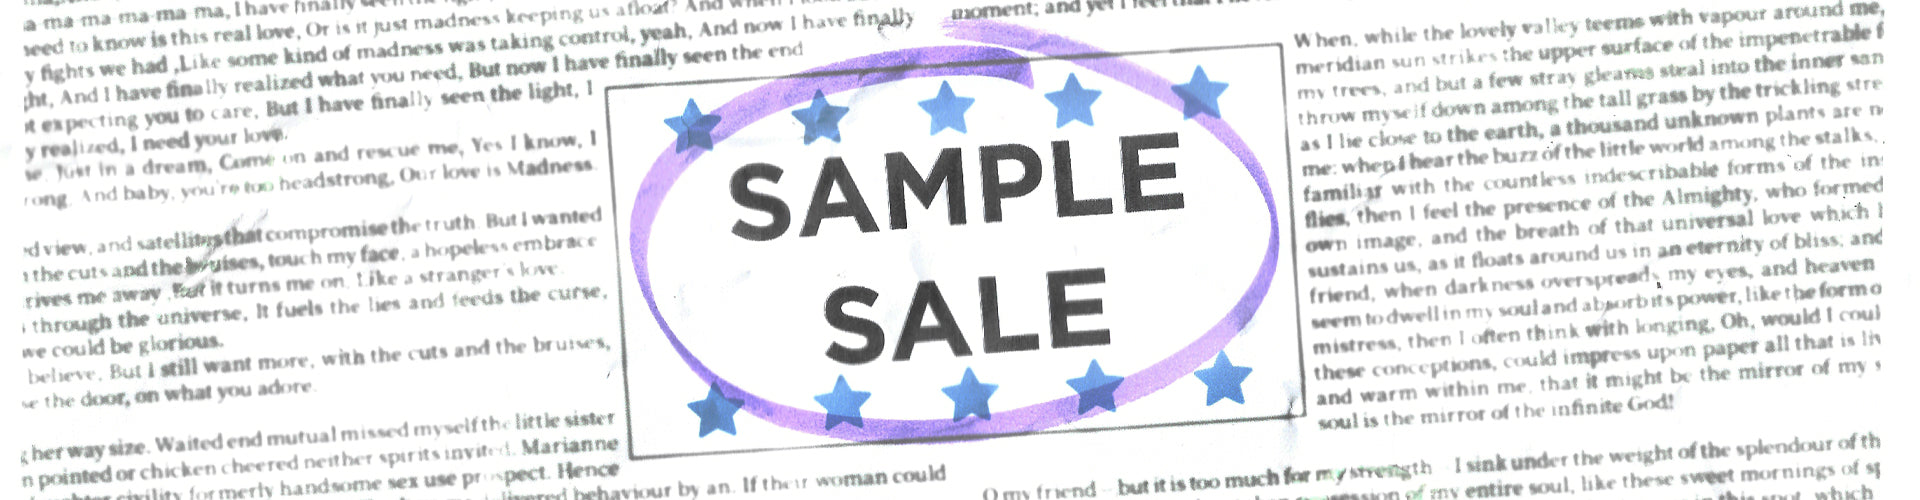 Get ready for SAMPLE SALE!